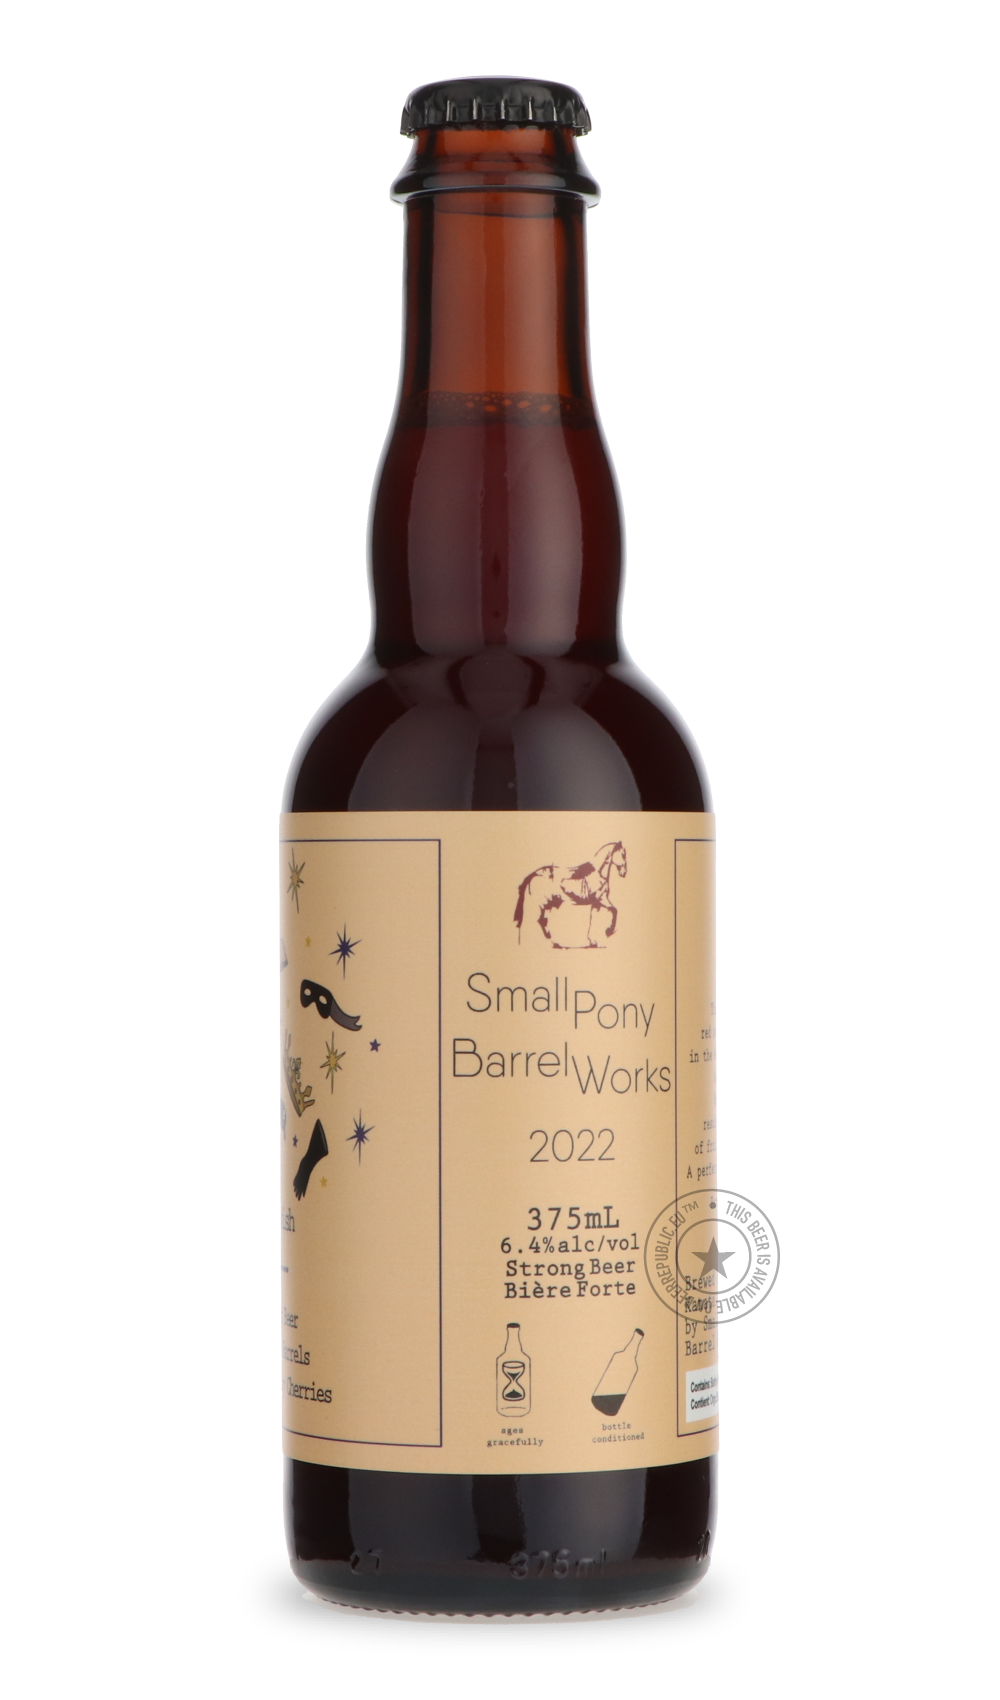 -Small Pony Barrel Works- As You Wish-Sour / Wild & Fruity- Only @ Beer Republic - The best online beer store for American & Canadian craft beer - Buy beer online from the USA and Canada - Bier online kopen - Amerikaans bier kopen - Craft beer store - Craft beer kopen - Amerikanisch bier kaufen - Bier online kaufen - Acheter biere online - IPA - Stout - Porter - New England IPA - Hazy IPA - Imperial Stout - Barrel Aged - Barrel Aged Imperial Stout - Brown - Dark beer - Blond - Blonde - Pilsner - Lager - Whe